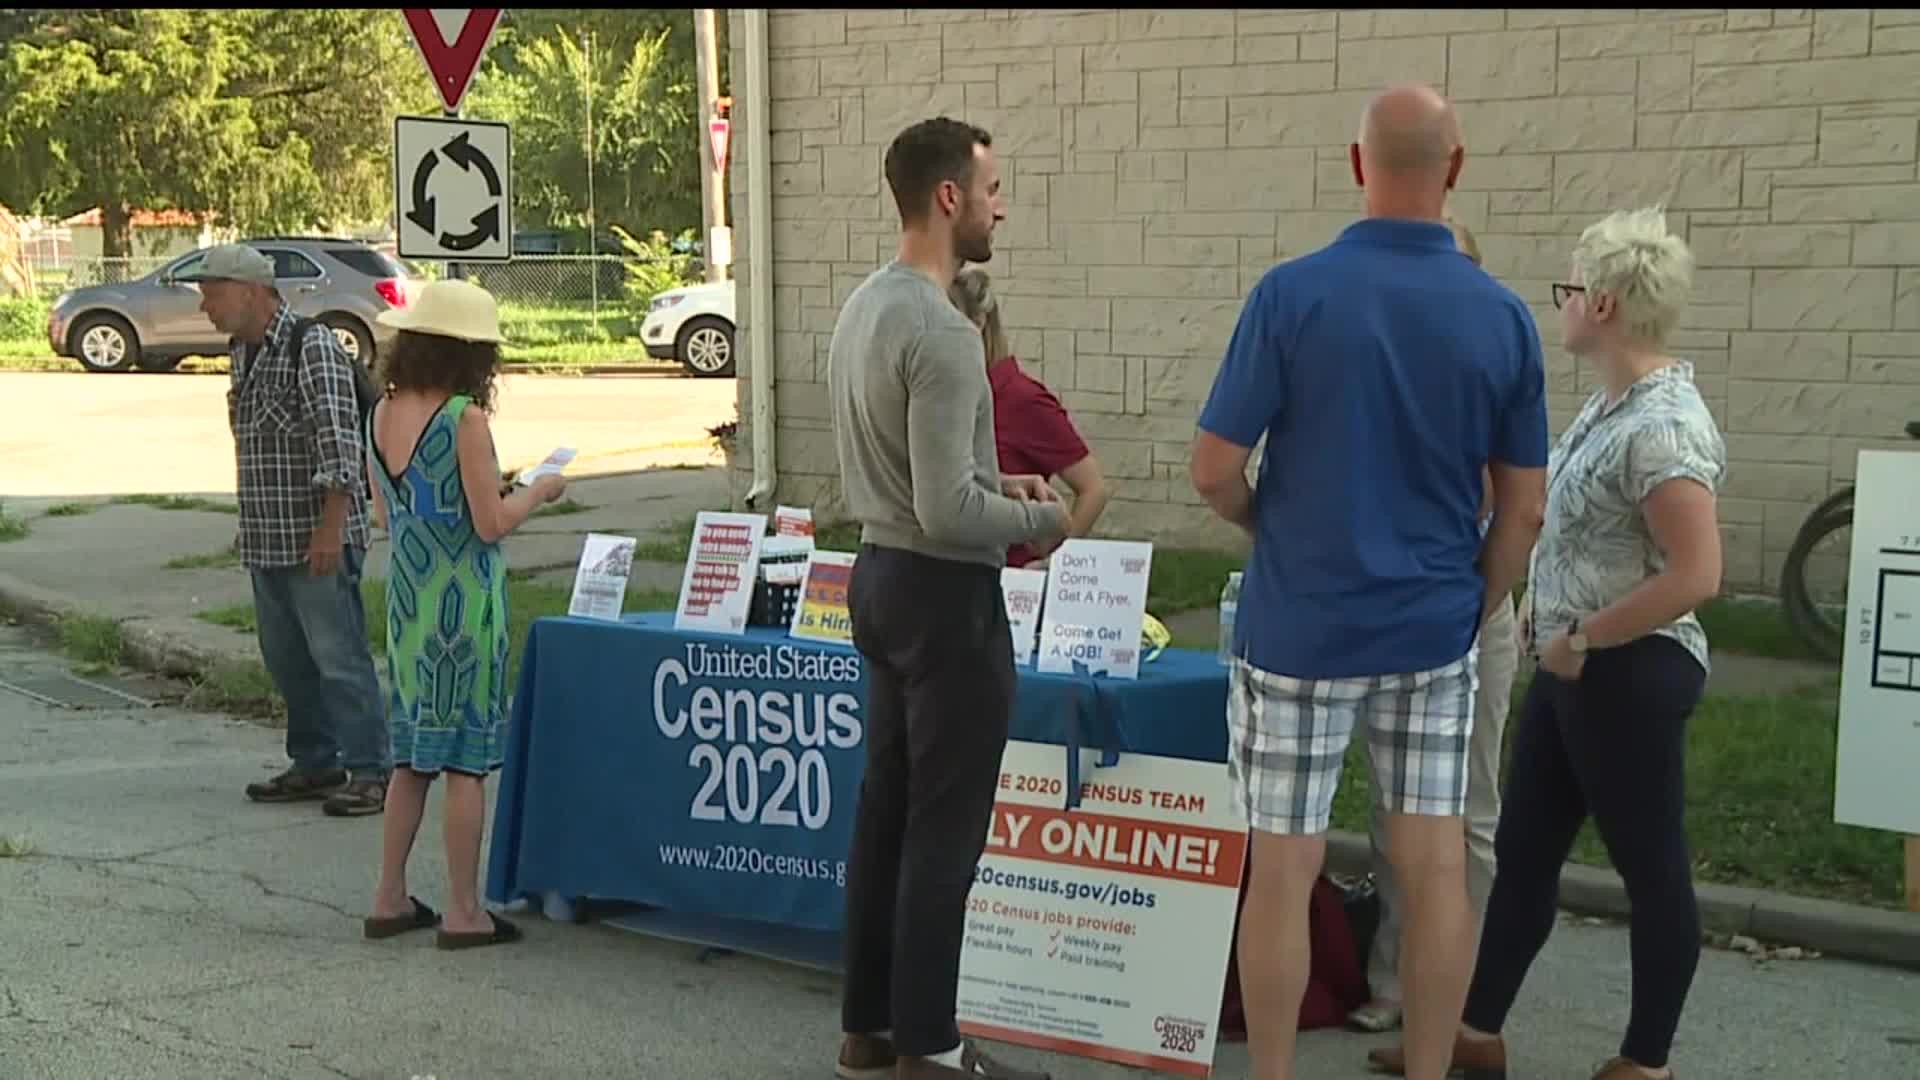 Davenport wants to ensure everyone is counted in 2020 Census